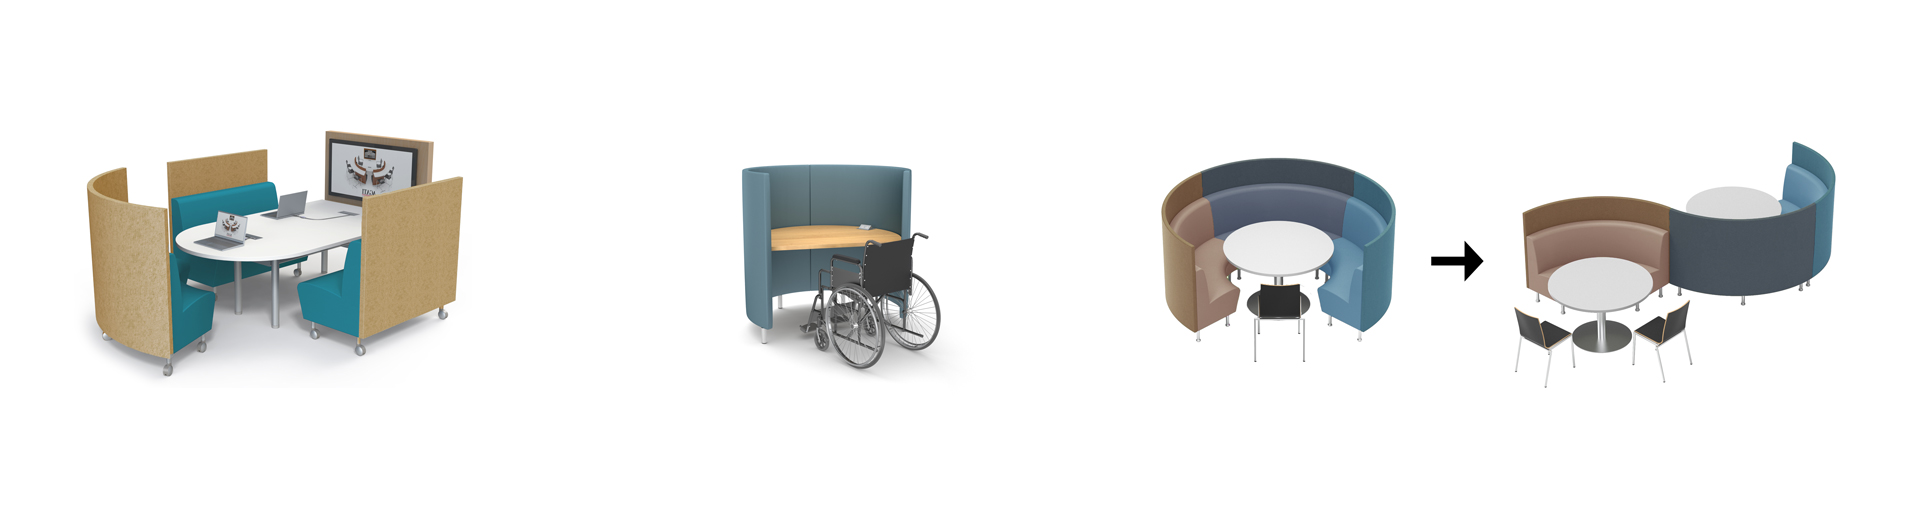 Library booth seating options including ADA Accessible option